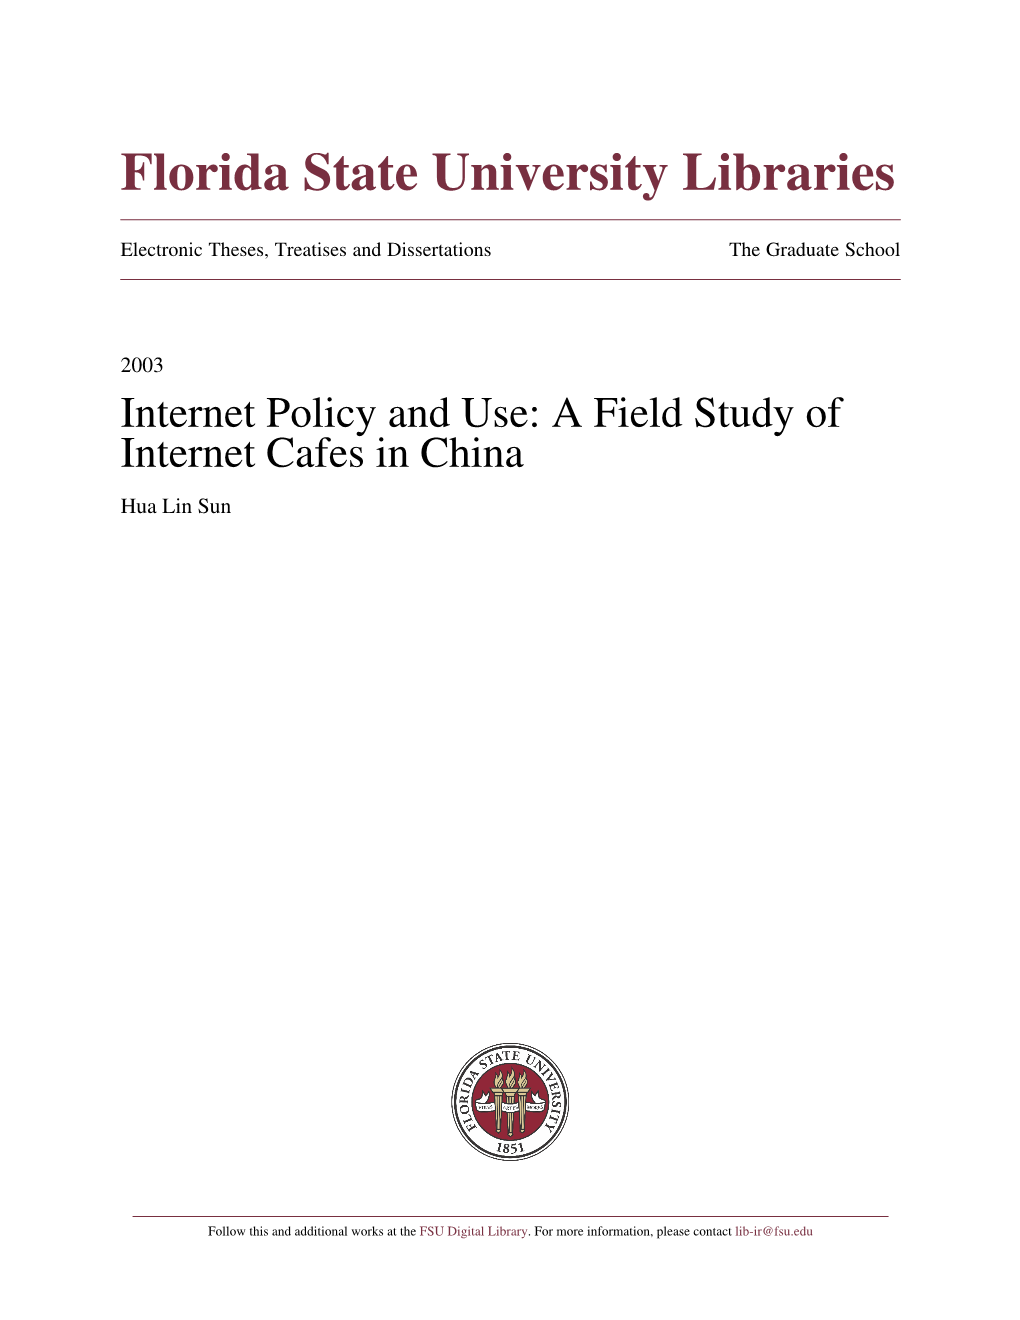 A Field Study of Internet Cafes in China Hua Lin Sun